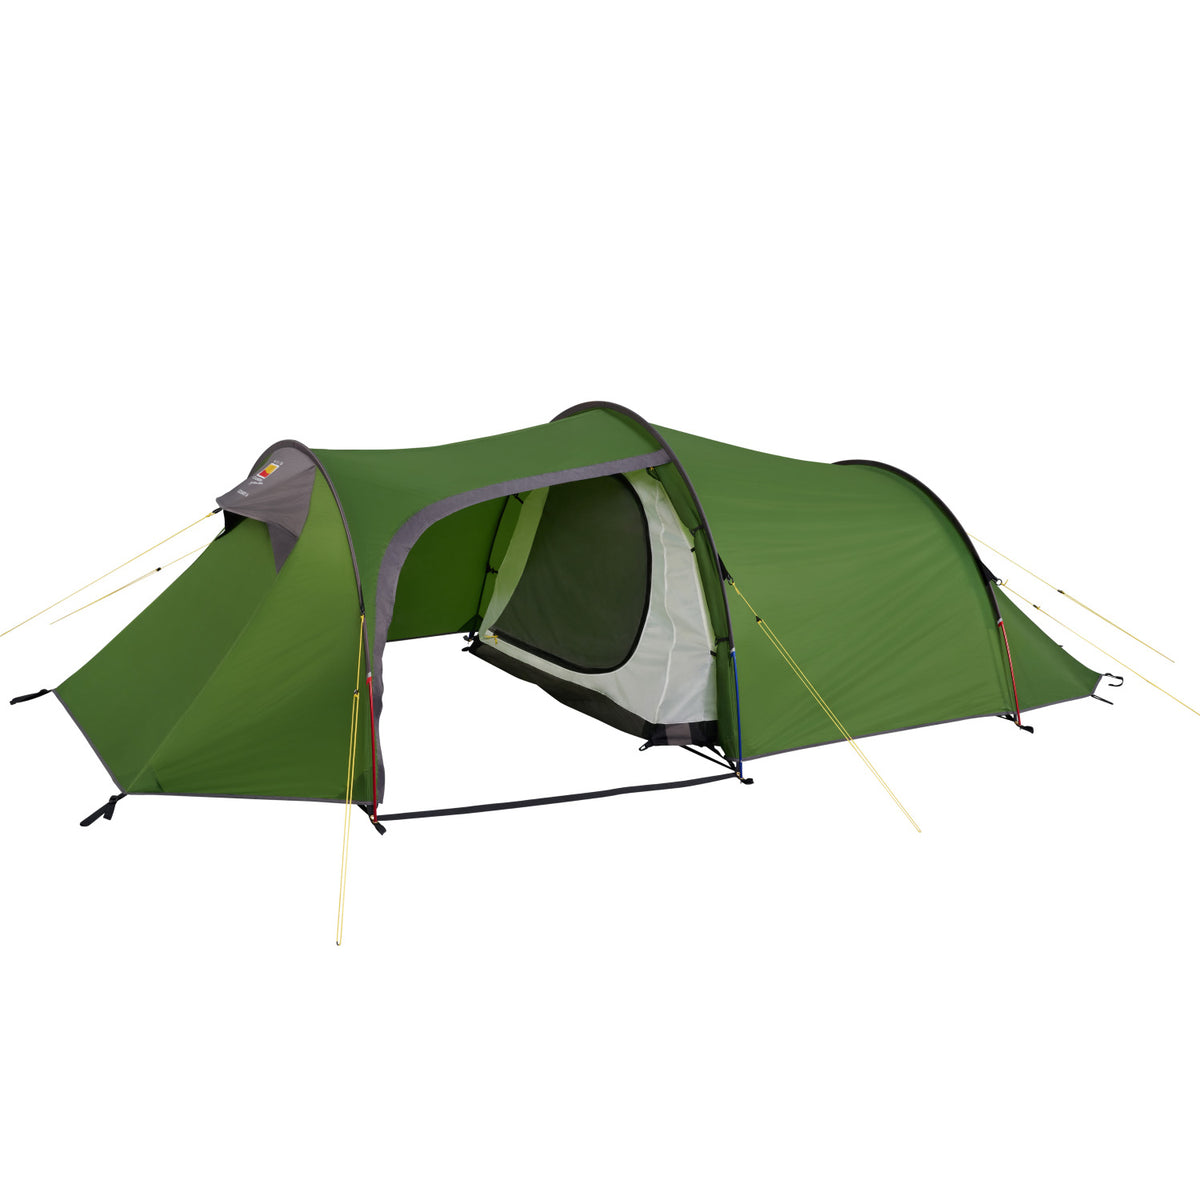 Wild Country Blizzard Compact 3 Three Person Tent - Green